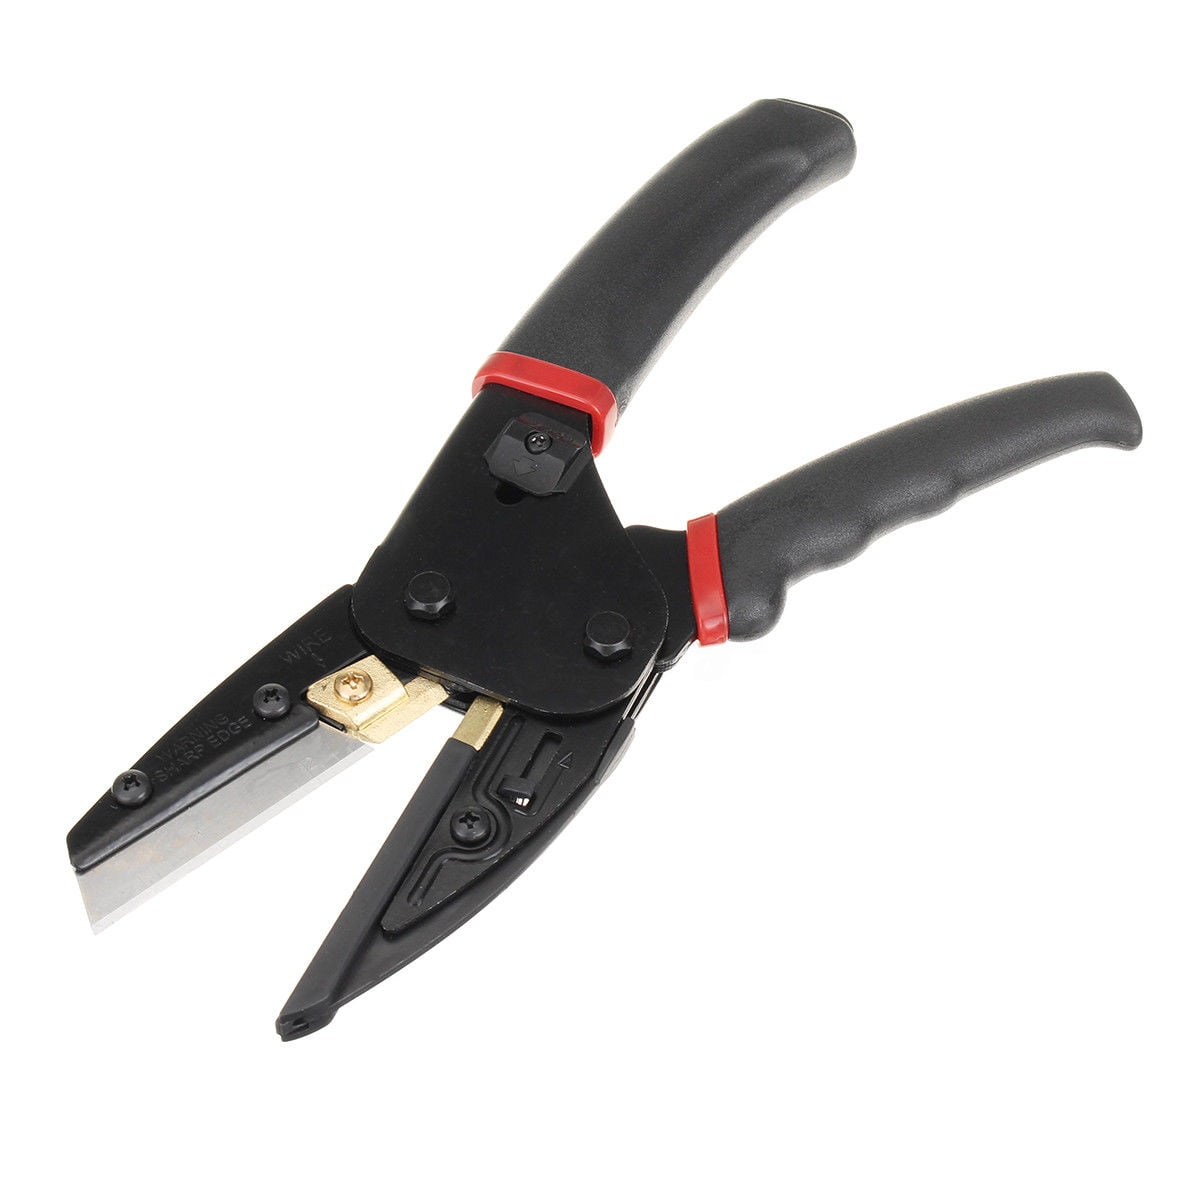 Multi-Function Cut 3 In 1 Pliers Power Cutting Tool With Built-In Wire Cutter 